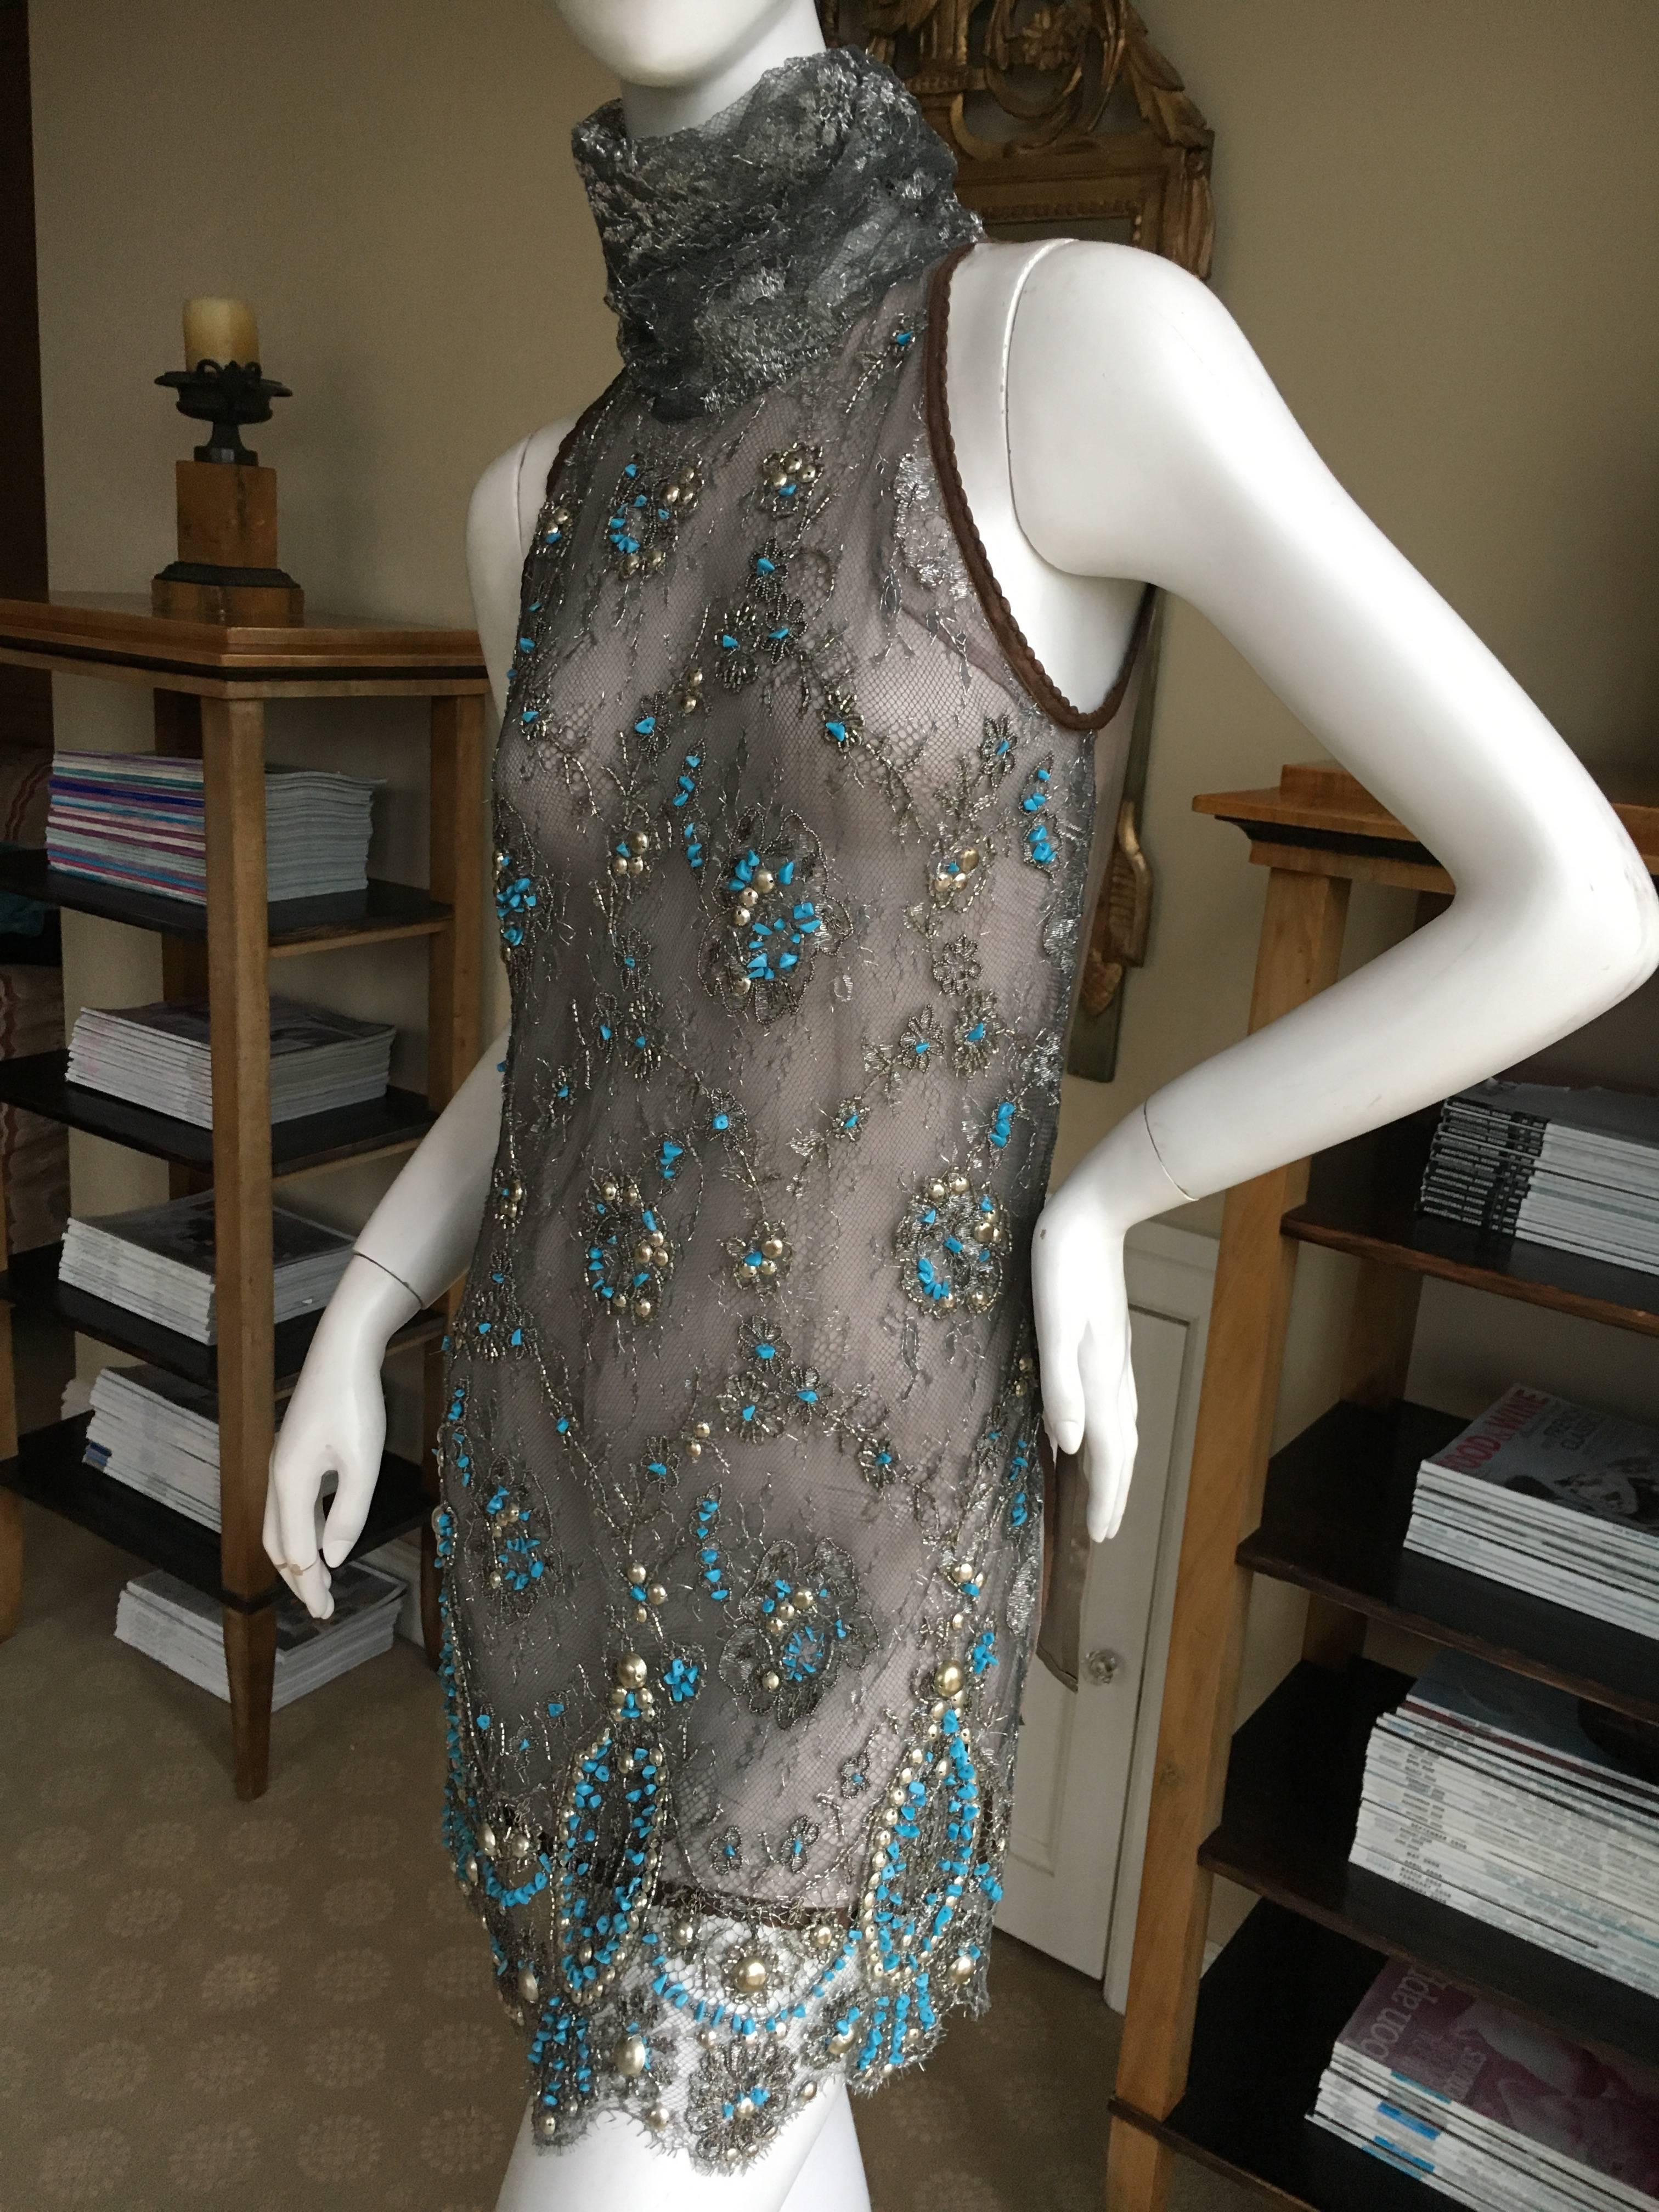 Gianfranco Ferre Silver Lace Tunic with Couture Quality Turquoise Embellishment For Sale 2